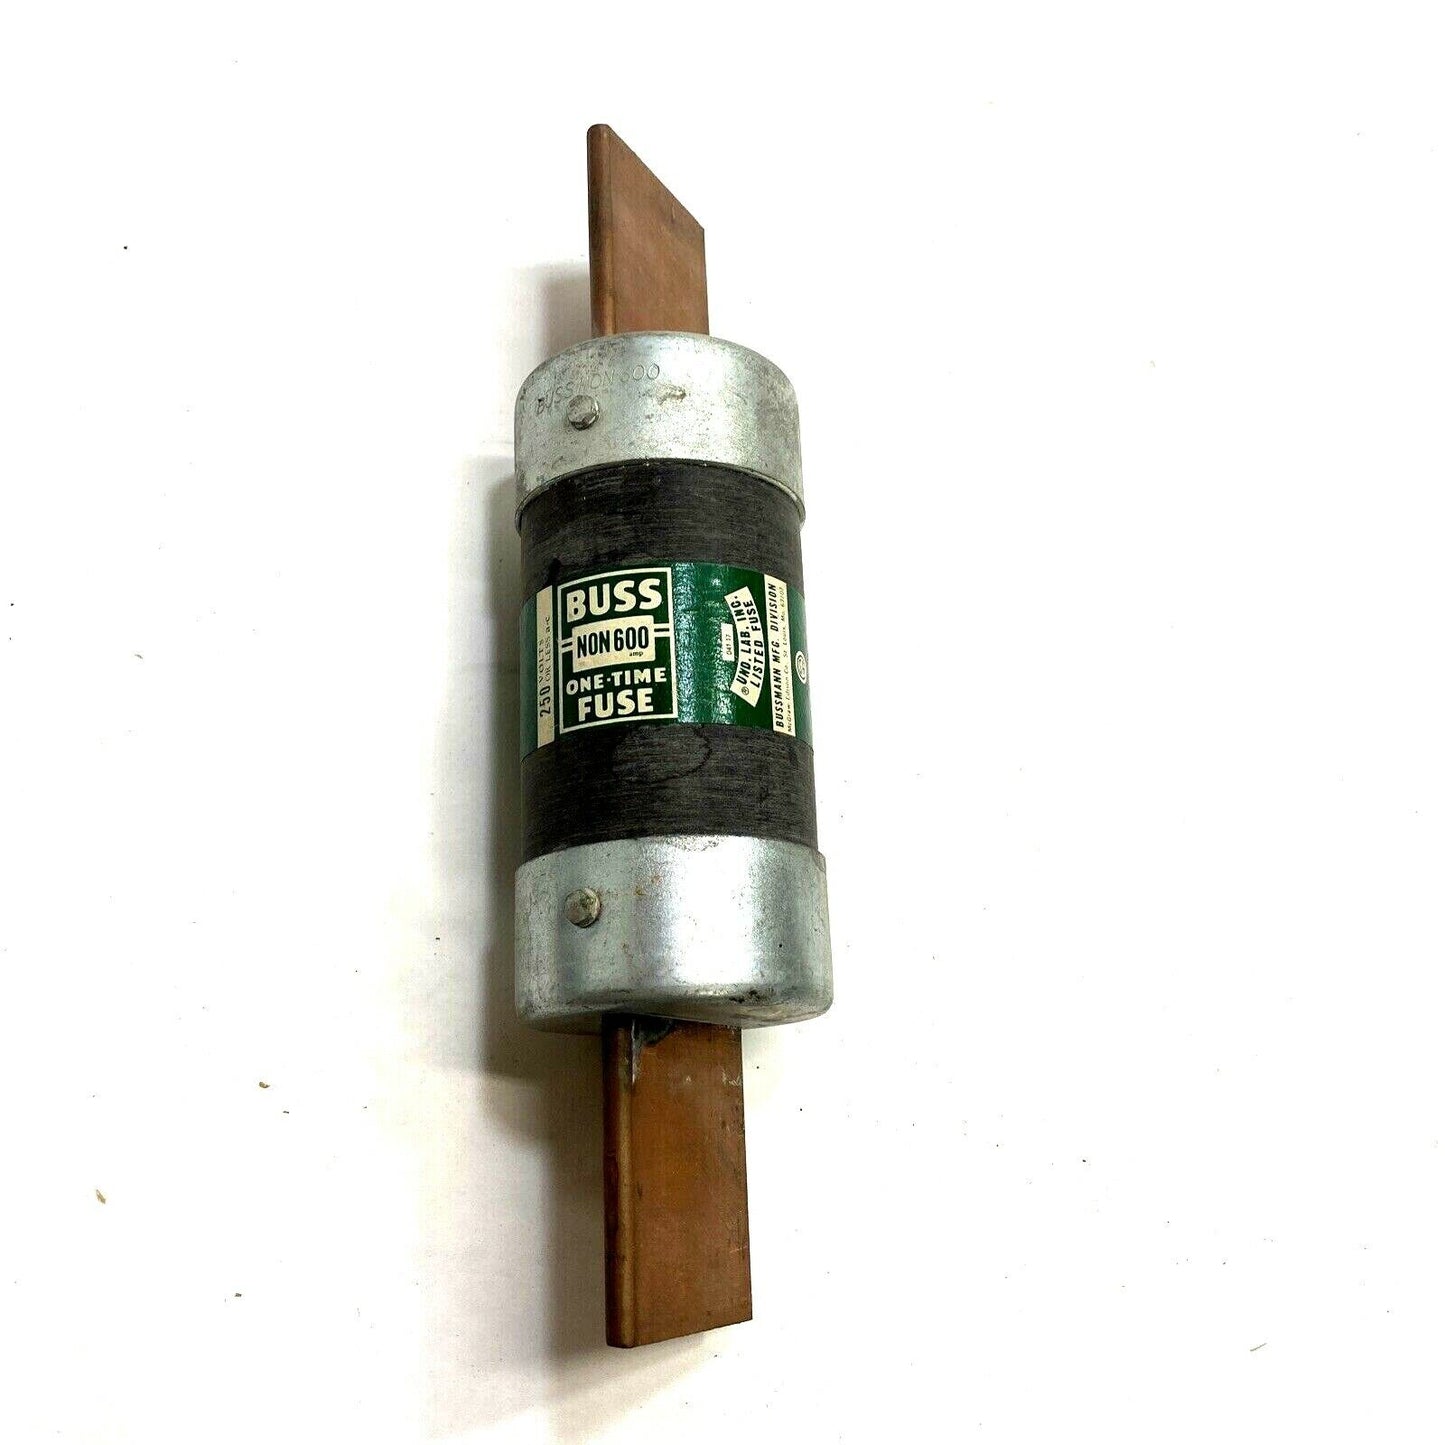 New Bussmann One Time Fuse NON600